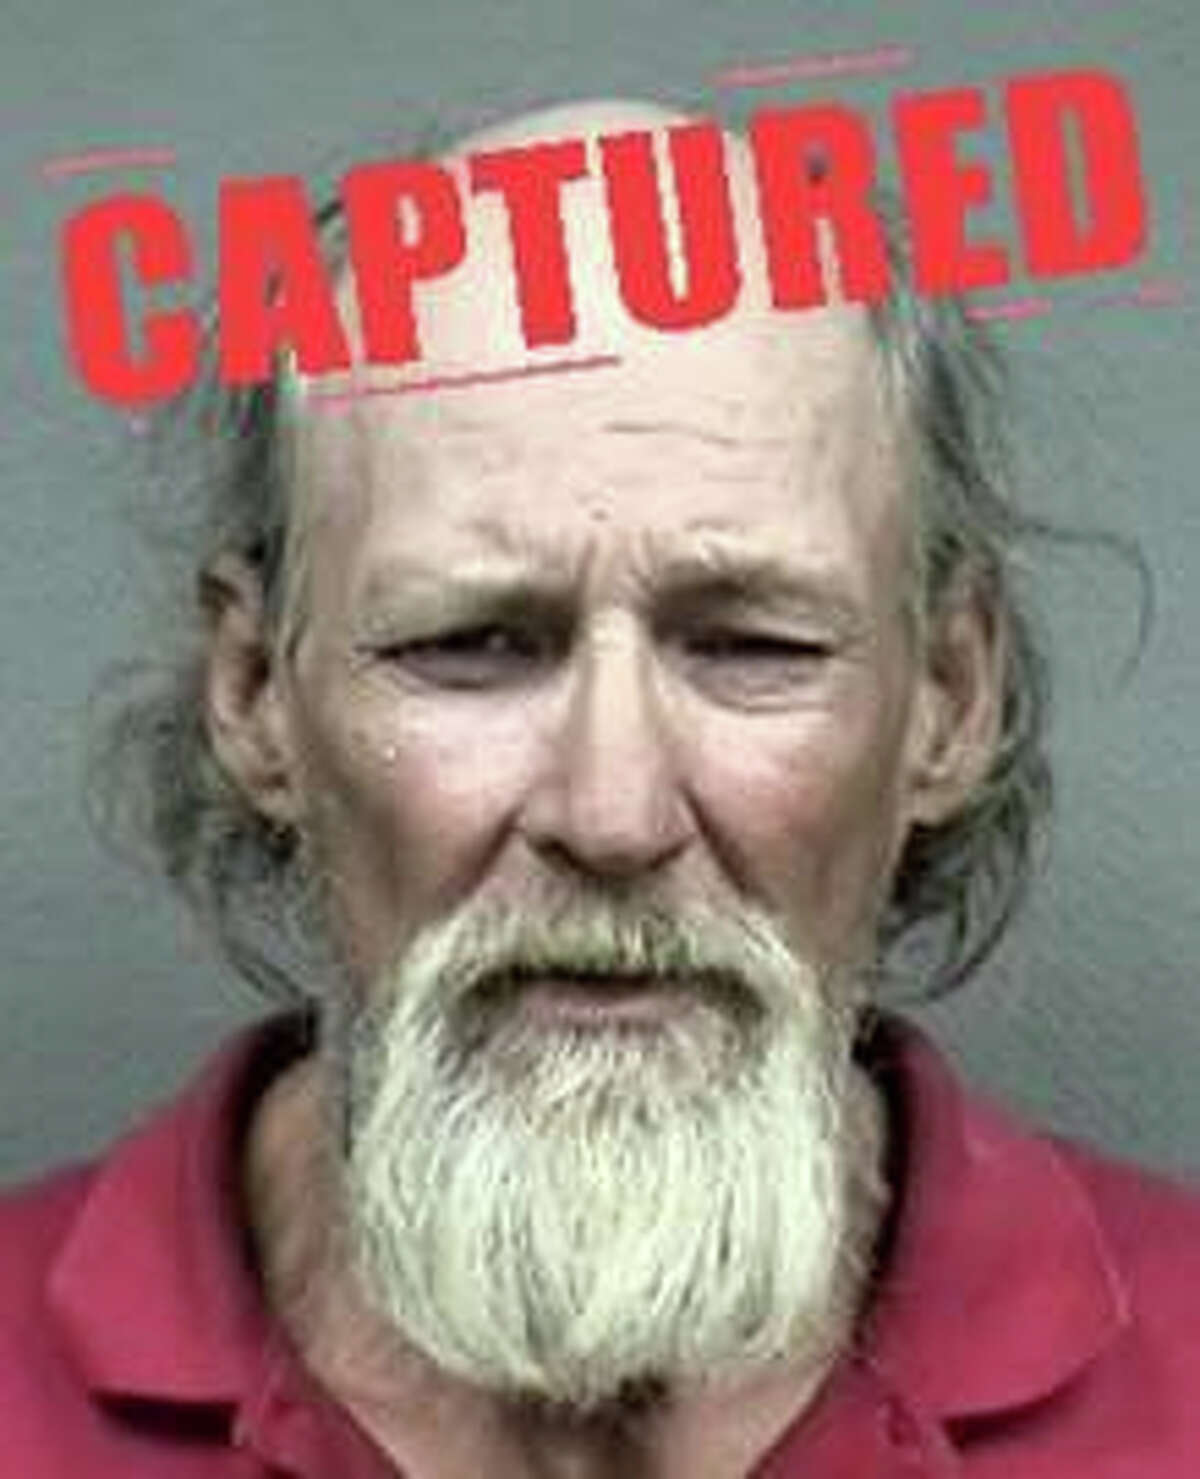 Top 10 Texas Most Wanted Sex Offender Captured In Houston